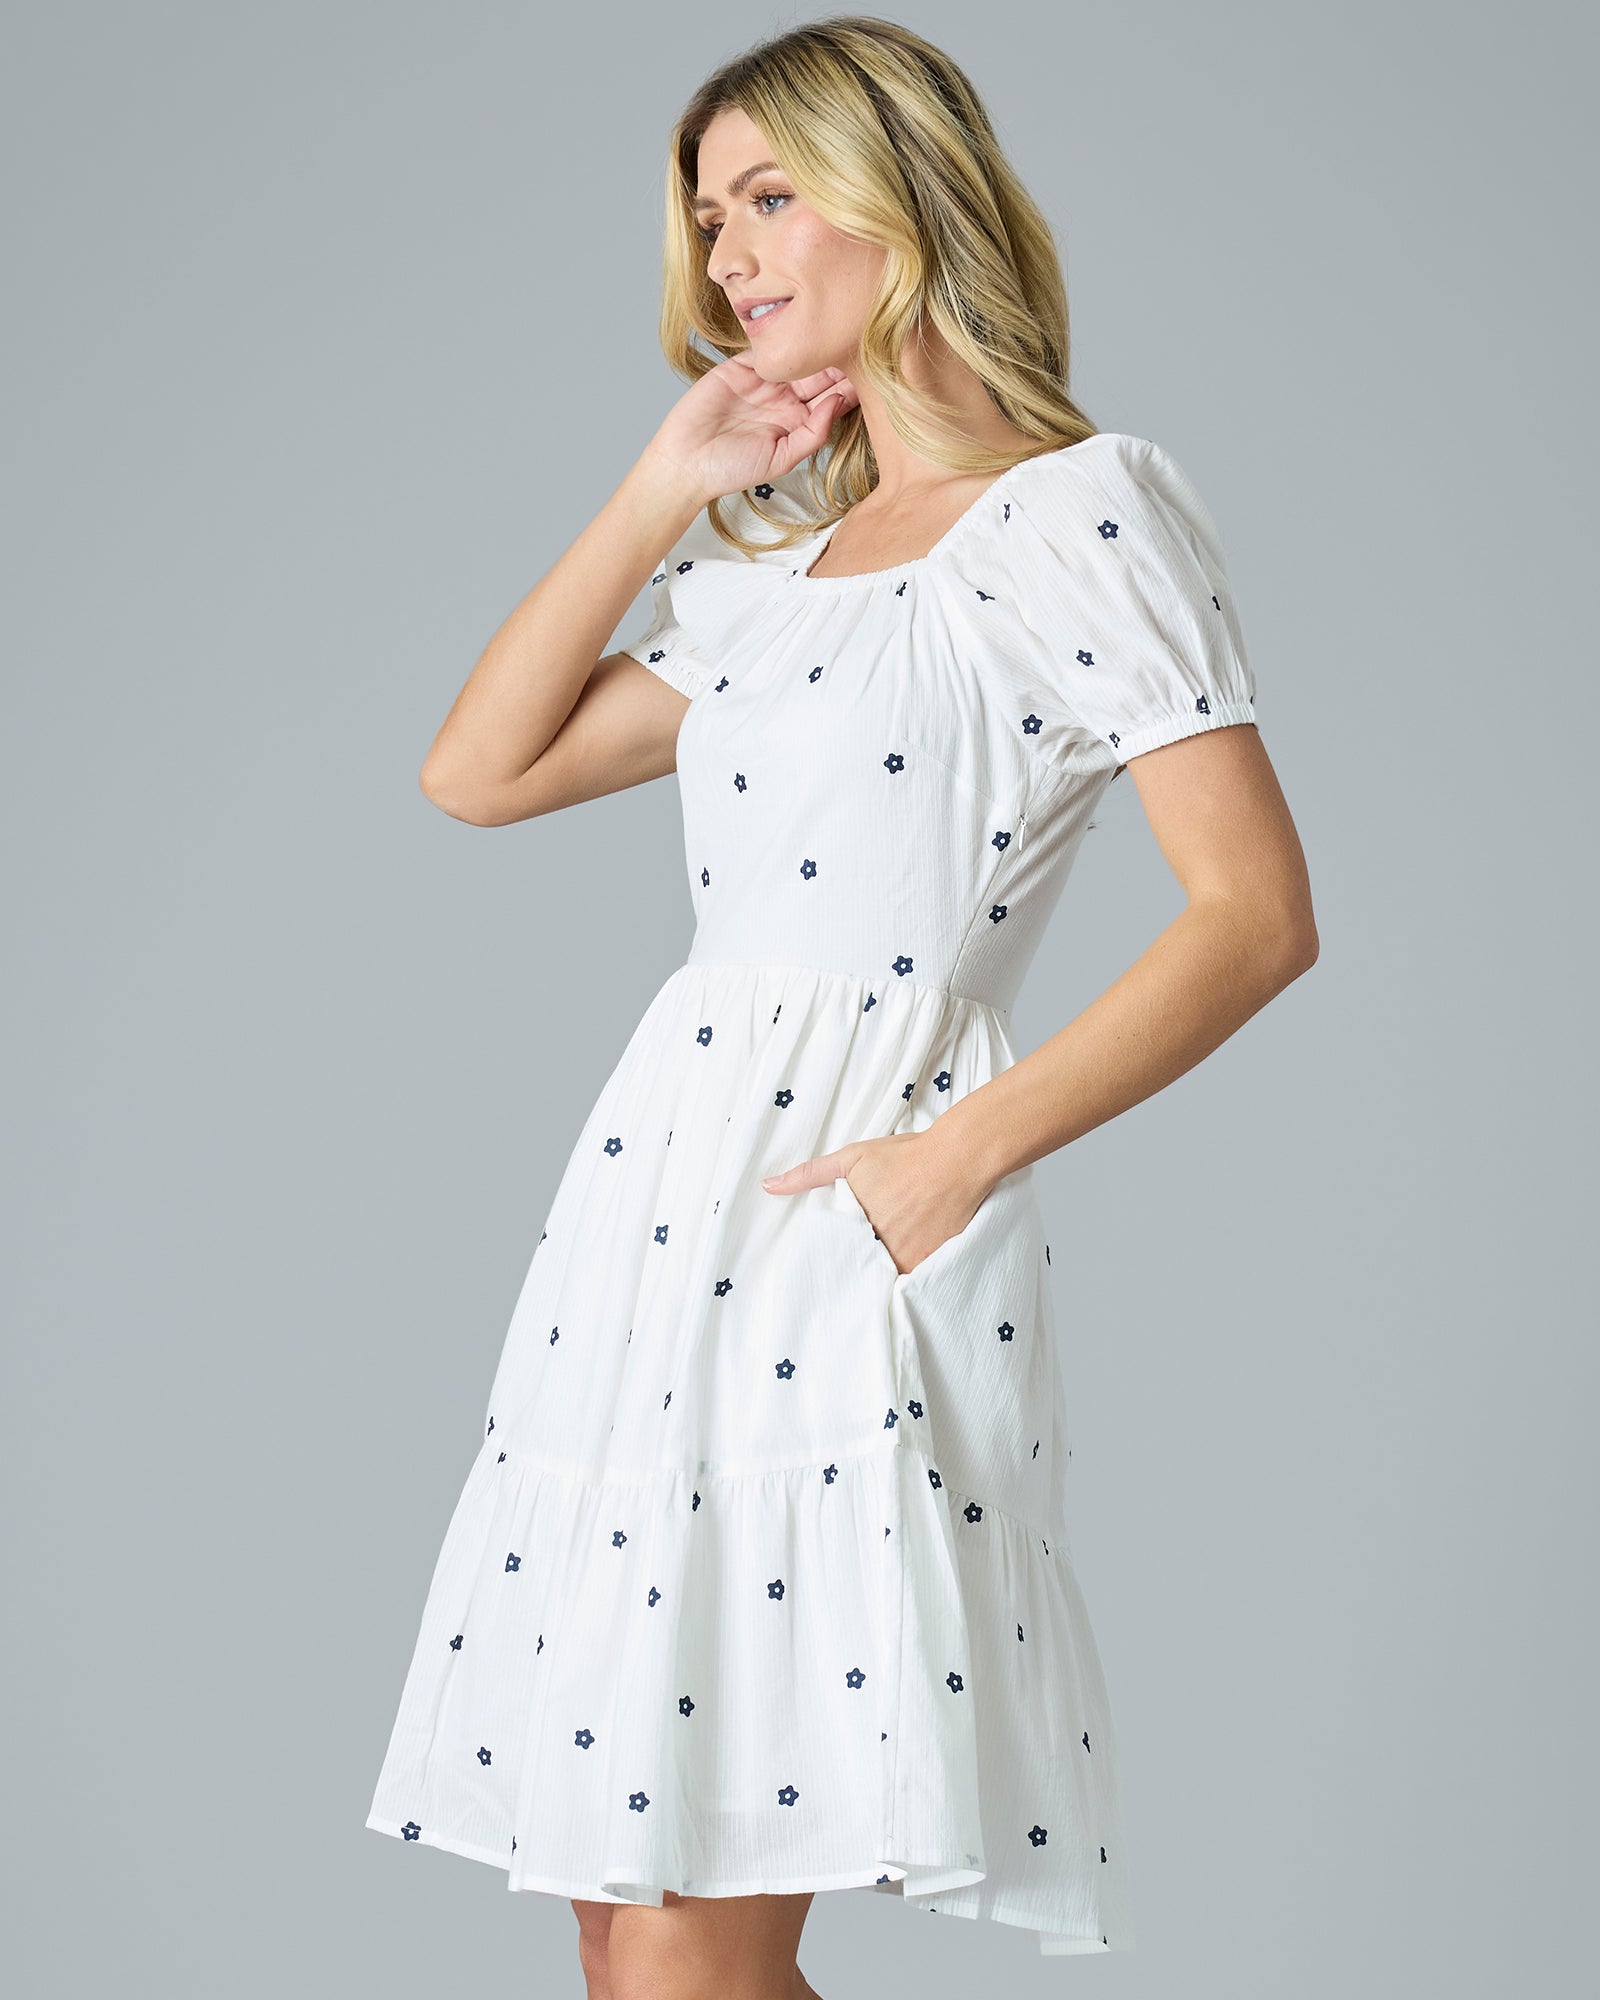 Woman in a white with blue flower dress that is knee-length and short sleeves